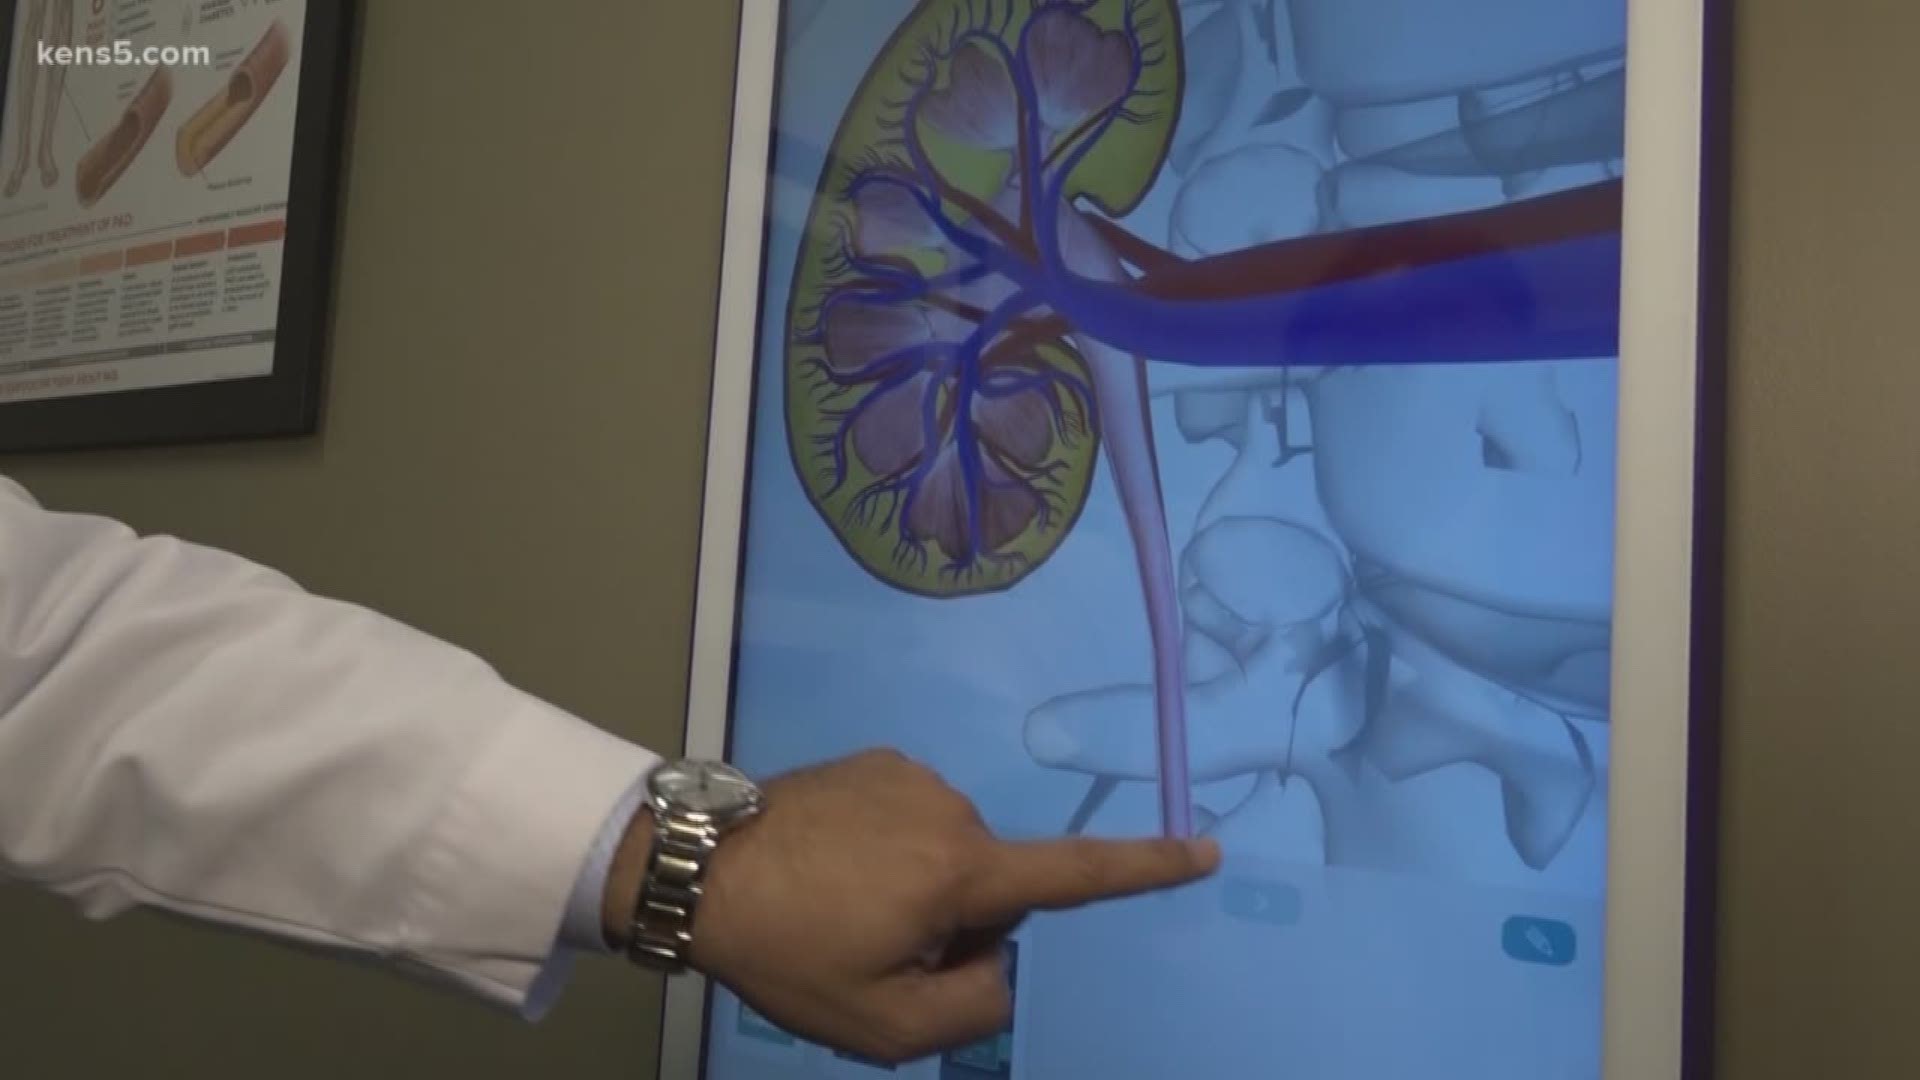 Don't kid with your kidneys: There's a new push to get San Antonians tested for kidney disease. Doctors say many people don't even realize they have it.